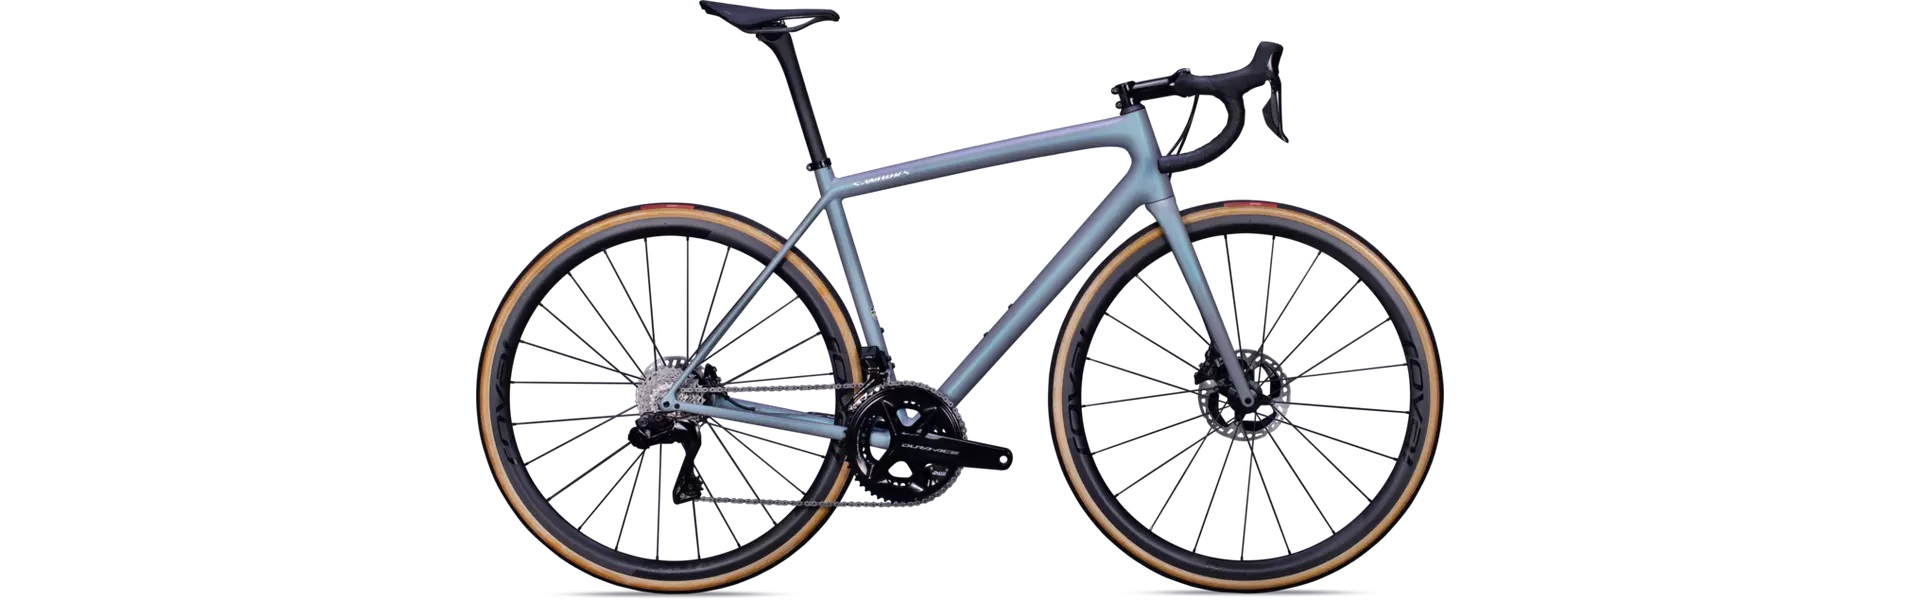 Specialized - S-Works Aethos - Dura-Ace Di2, 2022 Frontseite, in der Farbe Cool Grey / Chameleon Eyris Tint / Brushed Chrome